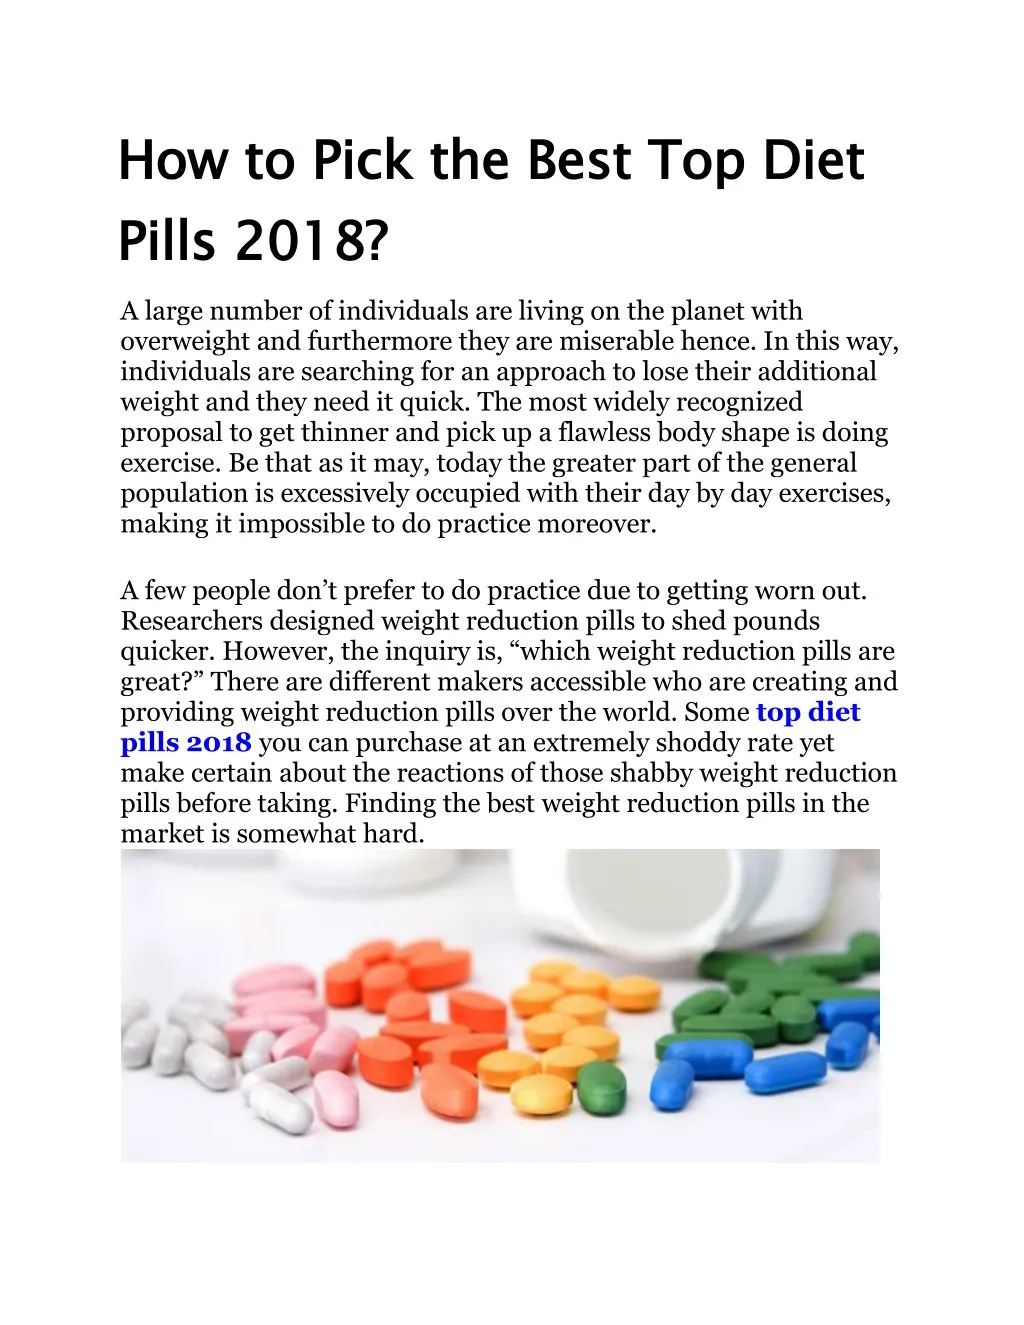 how to pick the best top diet pills a large